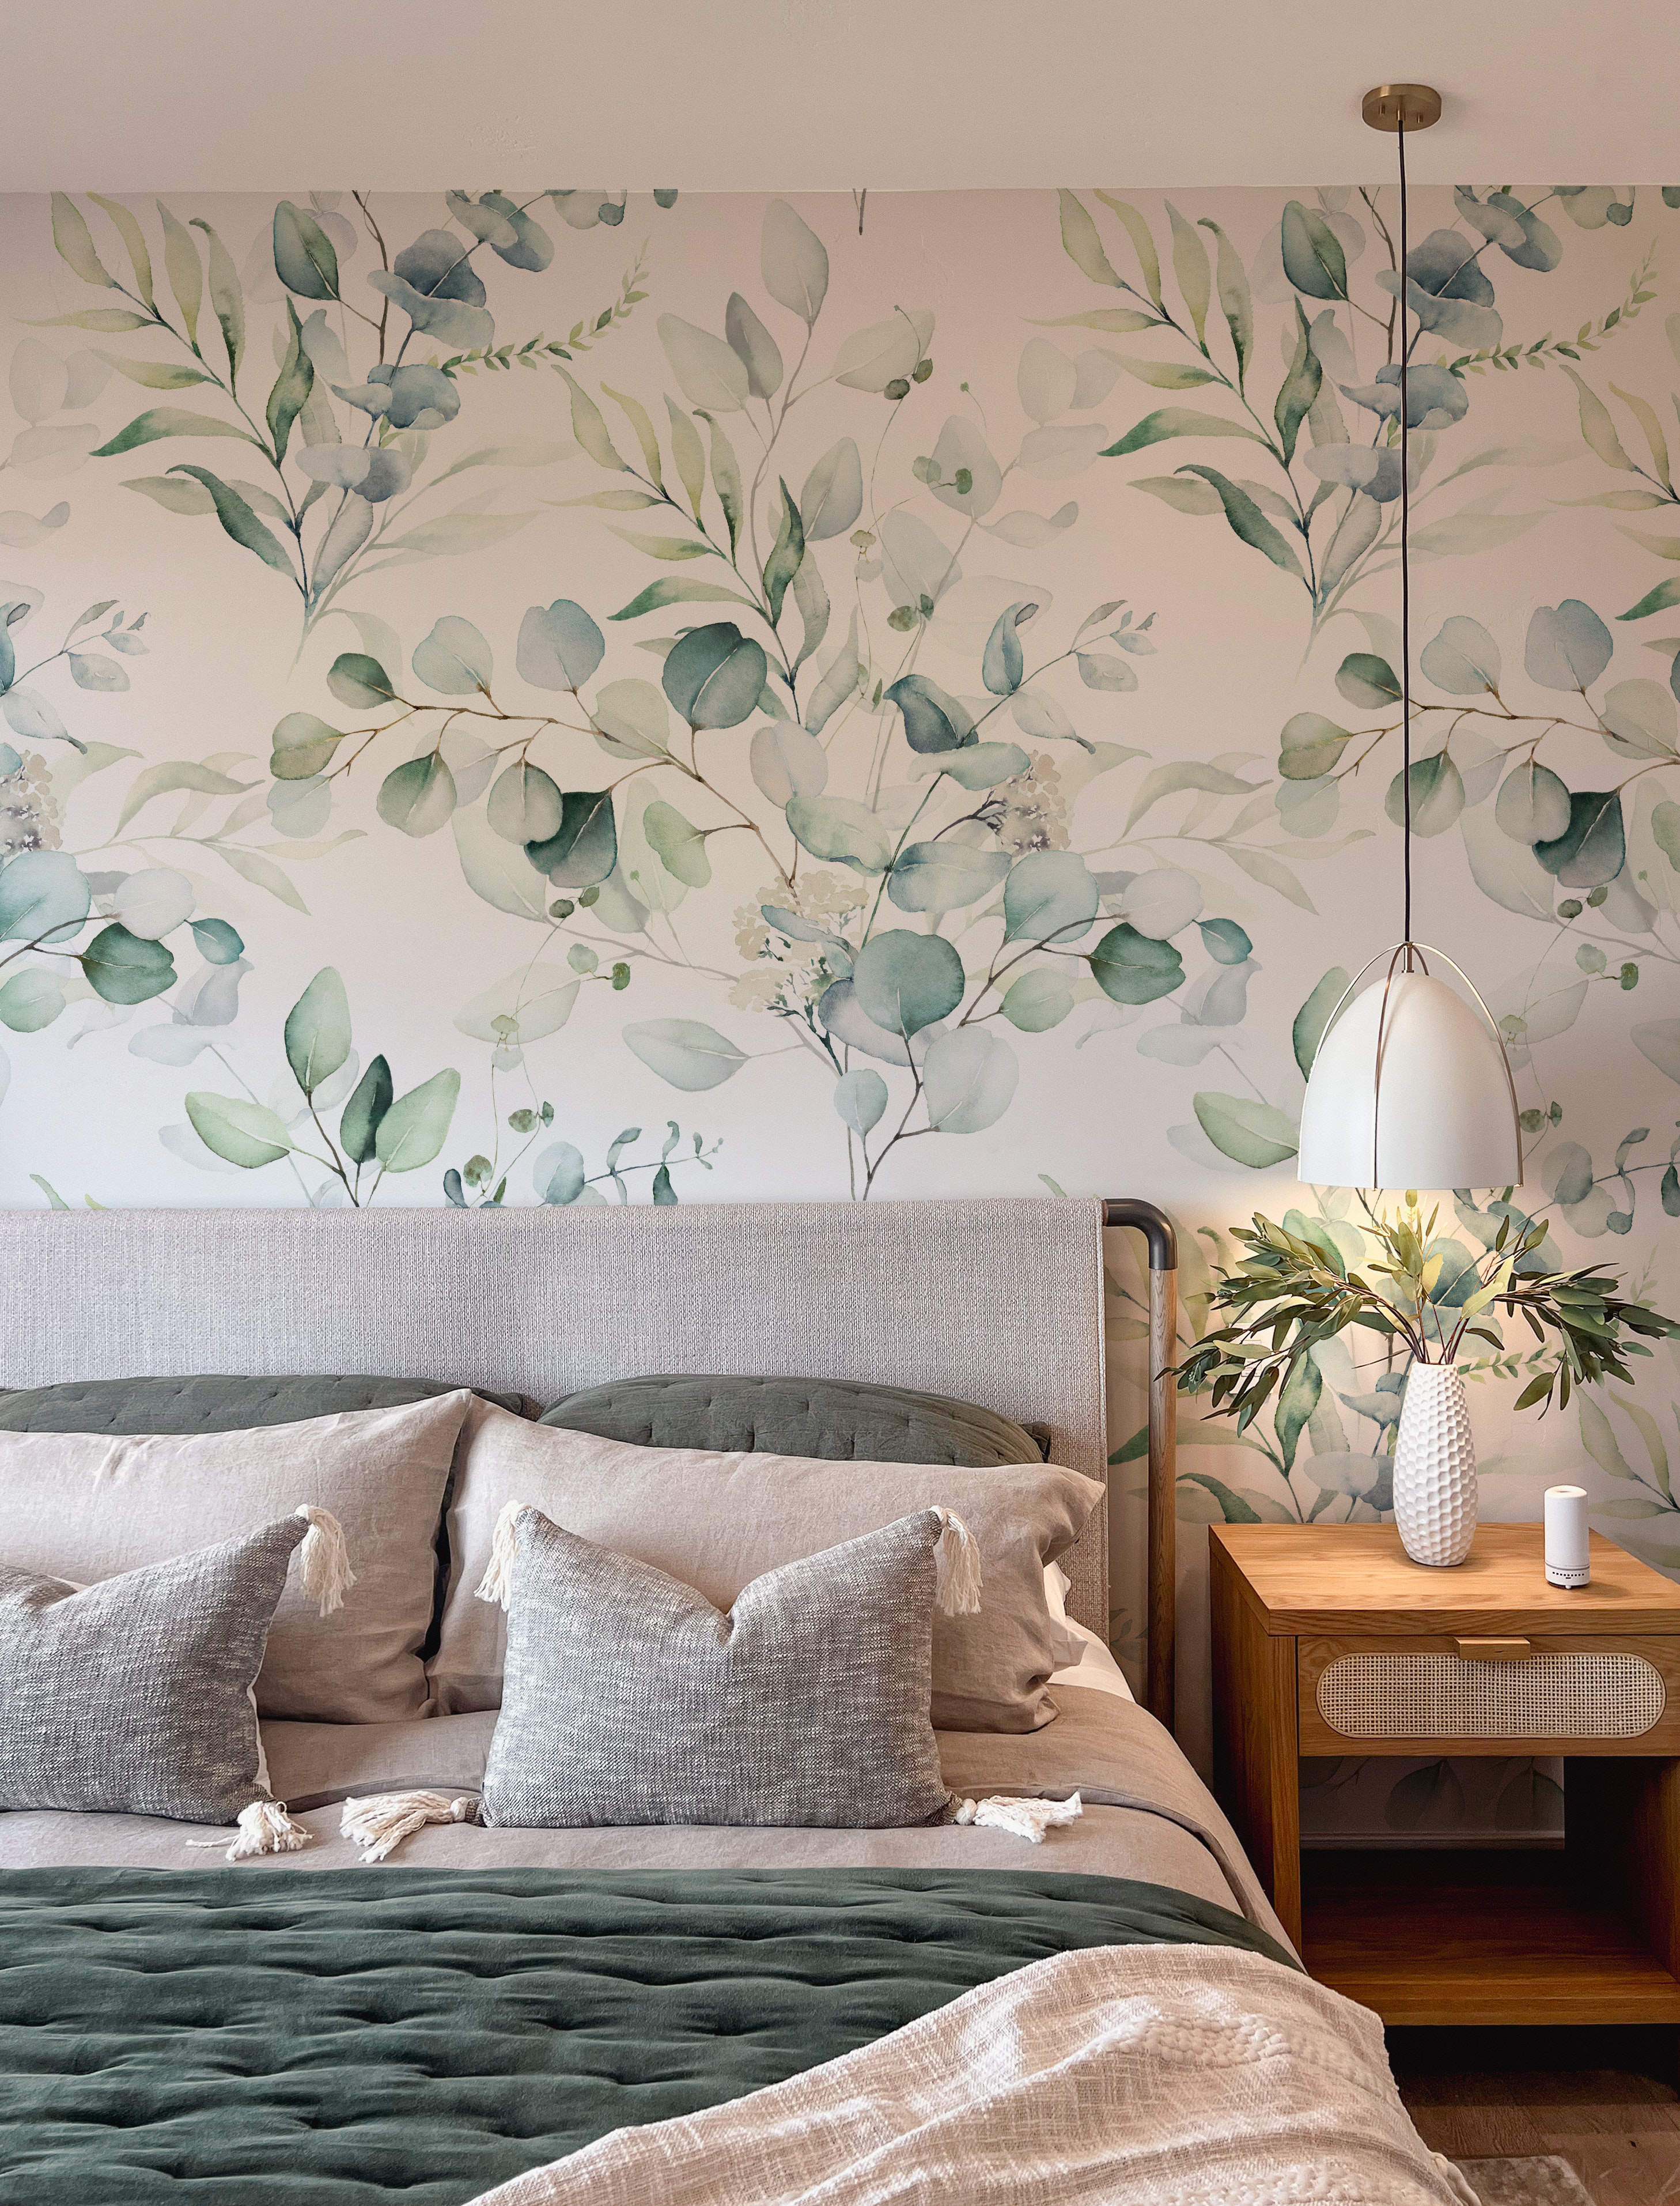 A stylish bedroom featuring the Green Leaves and Branches Wallpaper - Large, with an elegant botanical design of green leaves and branches that brings a sense of nature's serenity to the room, complemented by textured gray bedding and a chic bedside table with a vase and lamp.